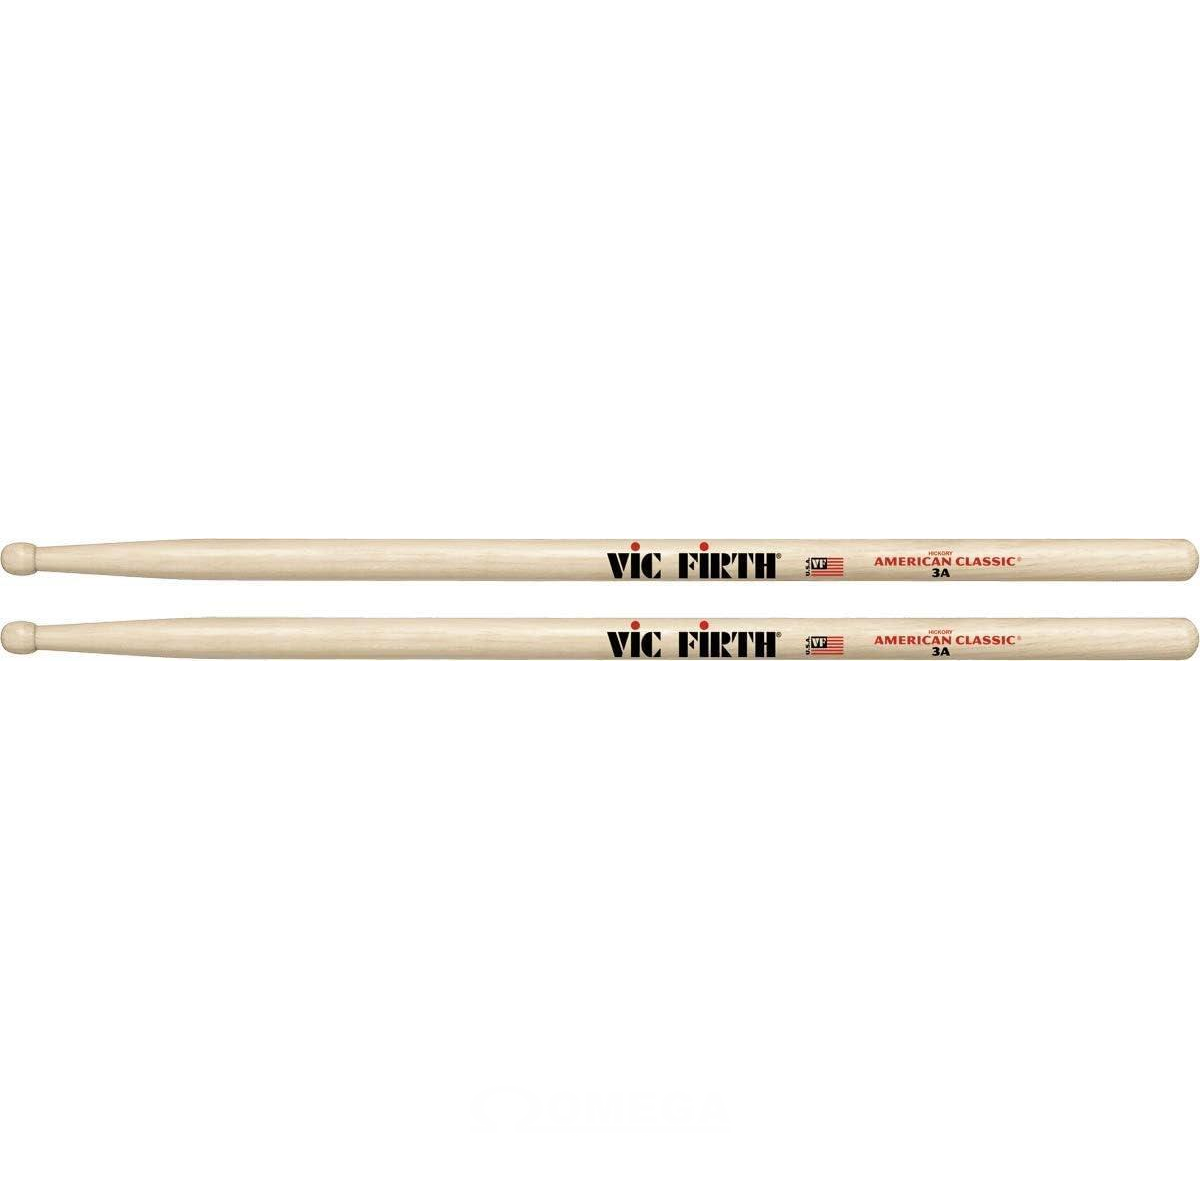 VIC FIRTH American Classic Hickory 3A